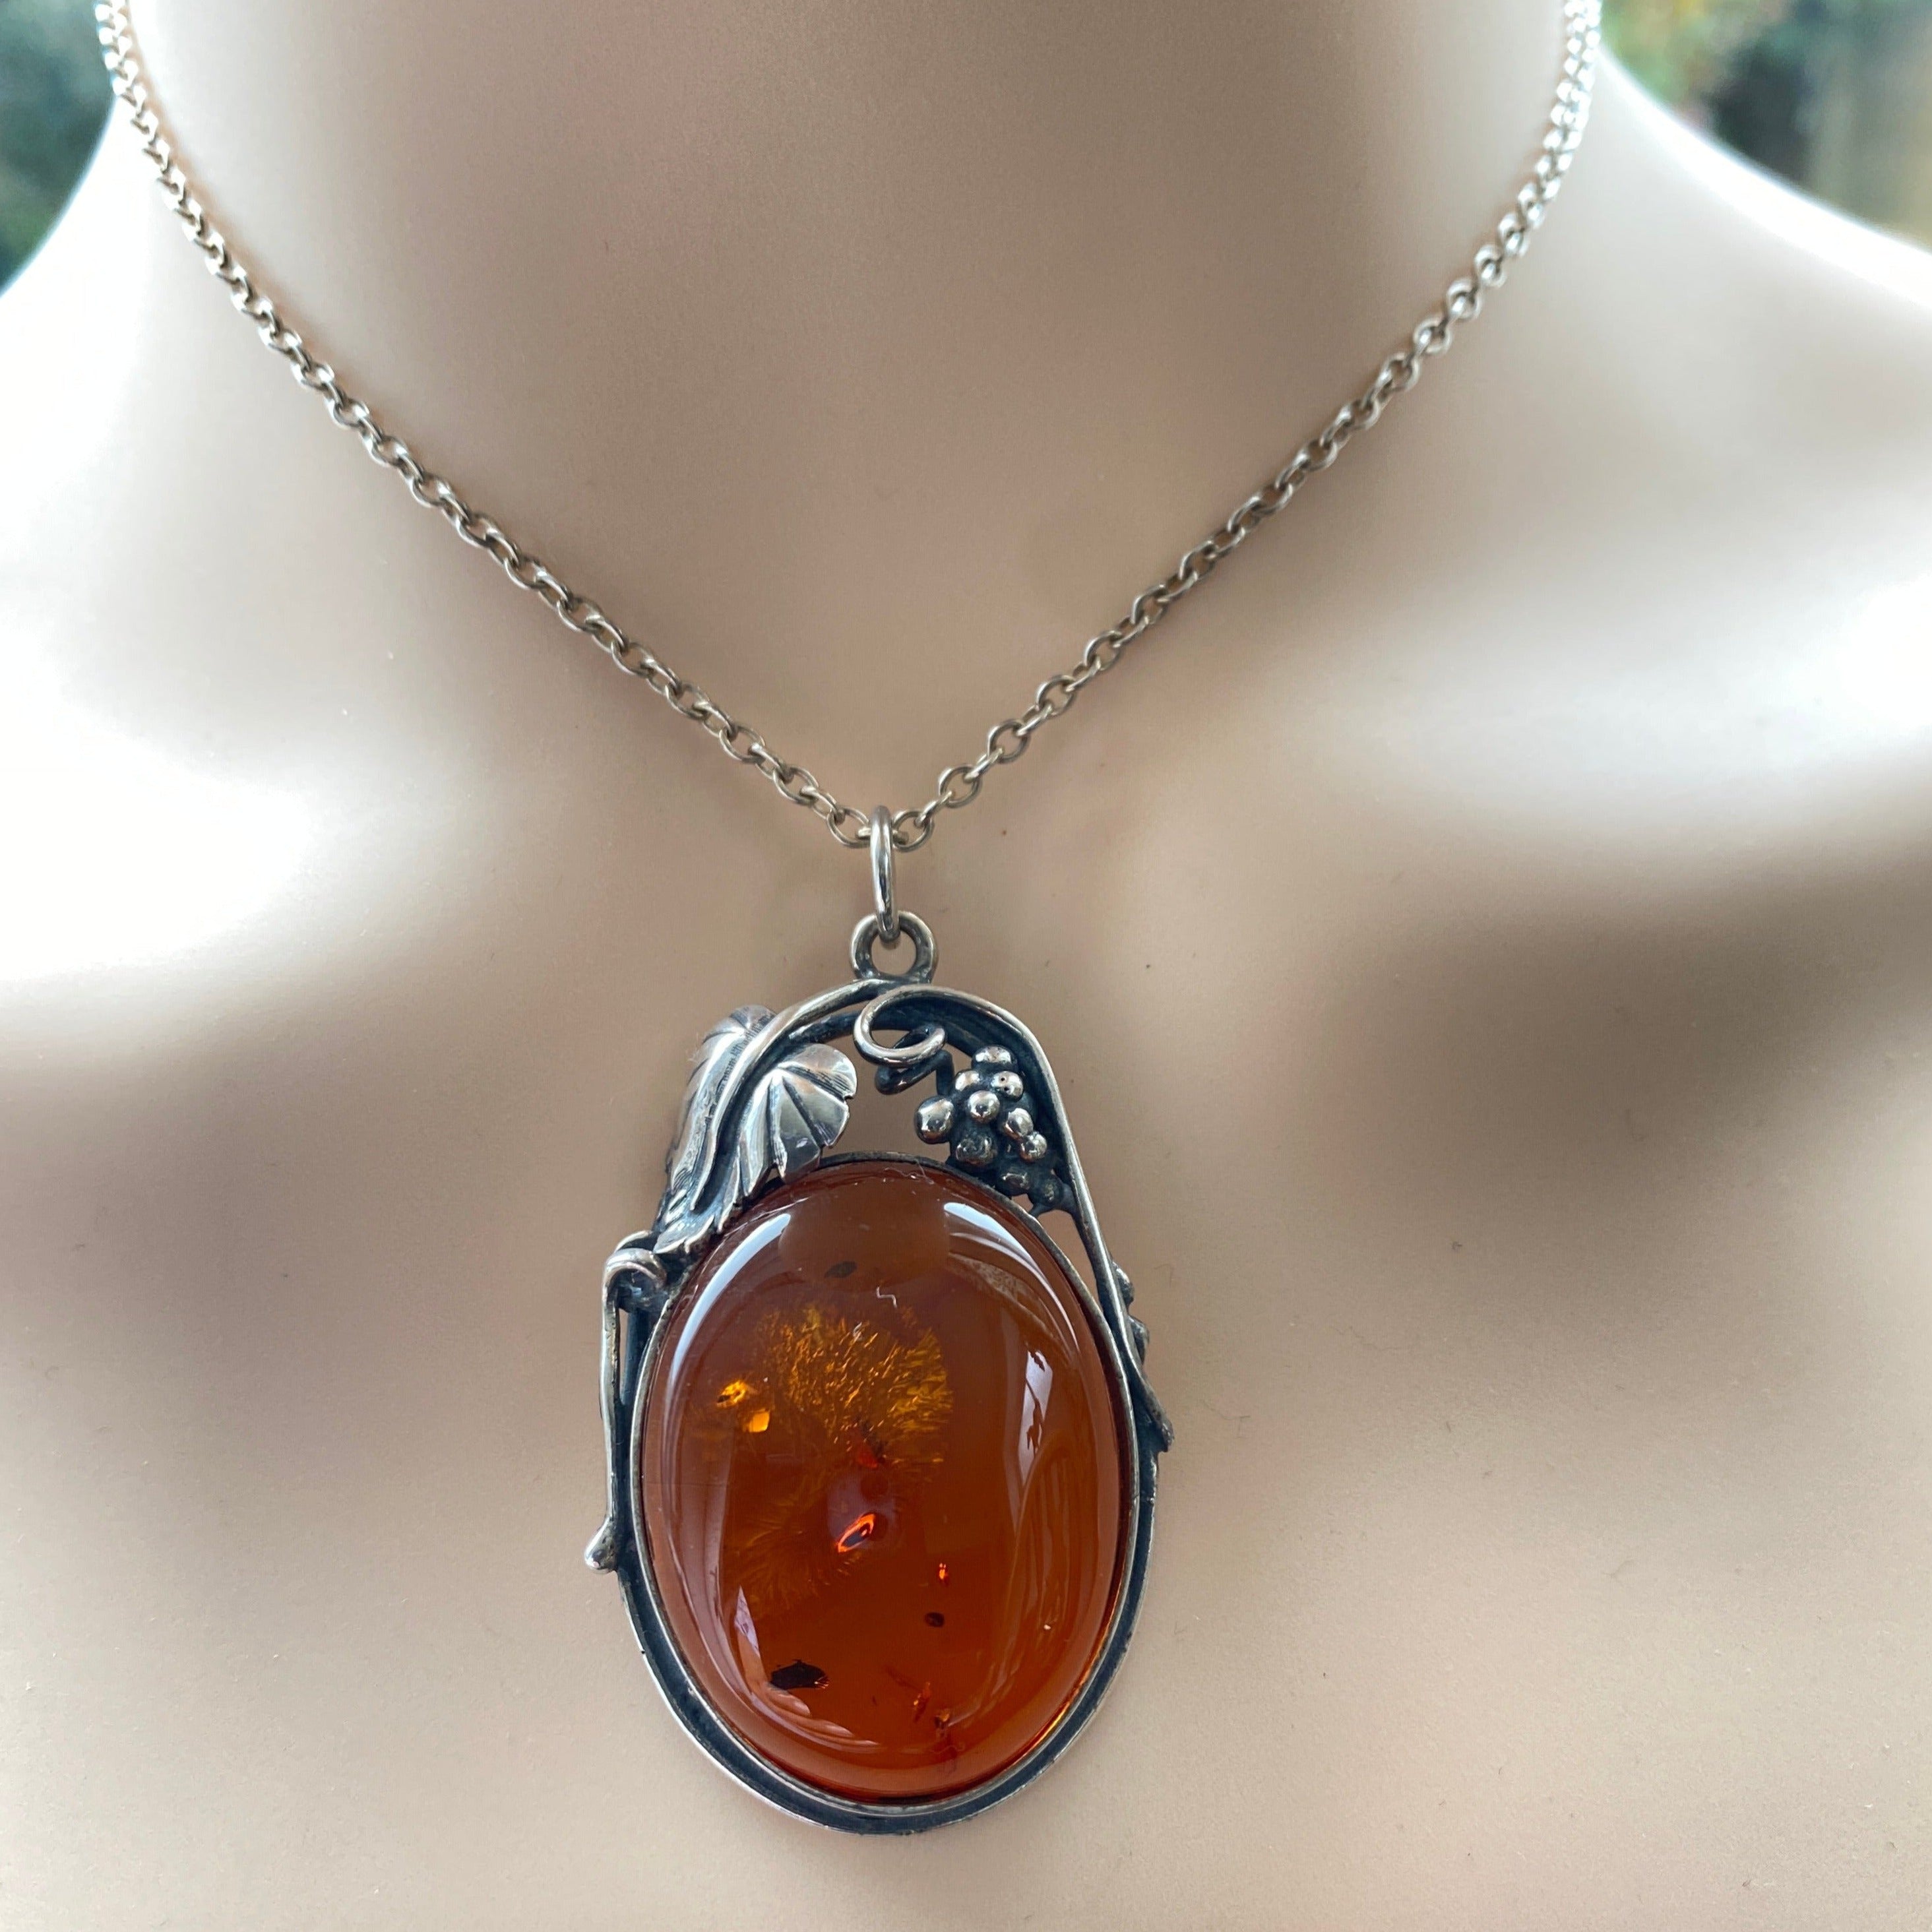 Sterling Silver Ornate Amber Pendant & Chain.